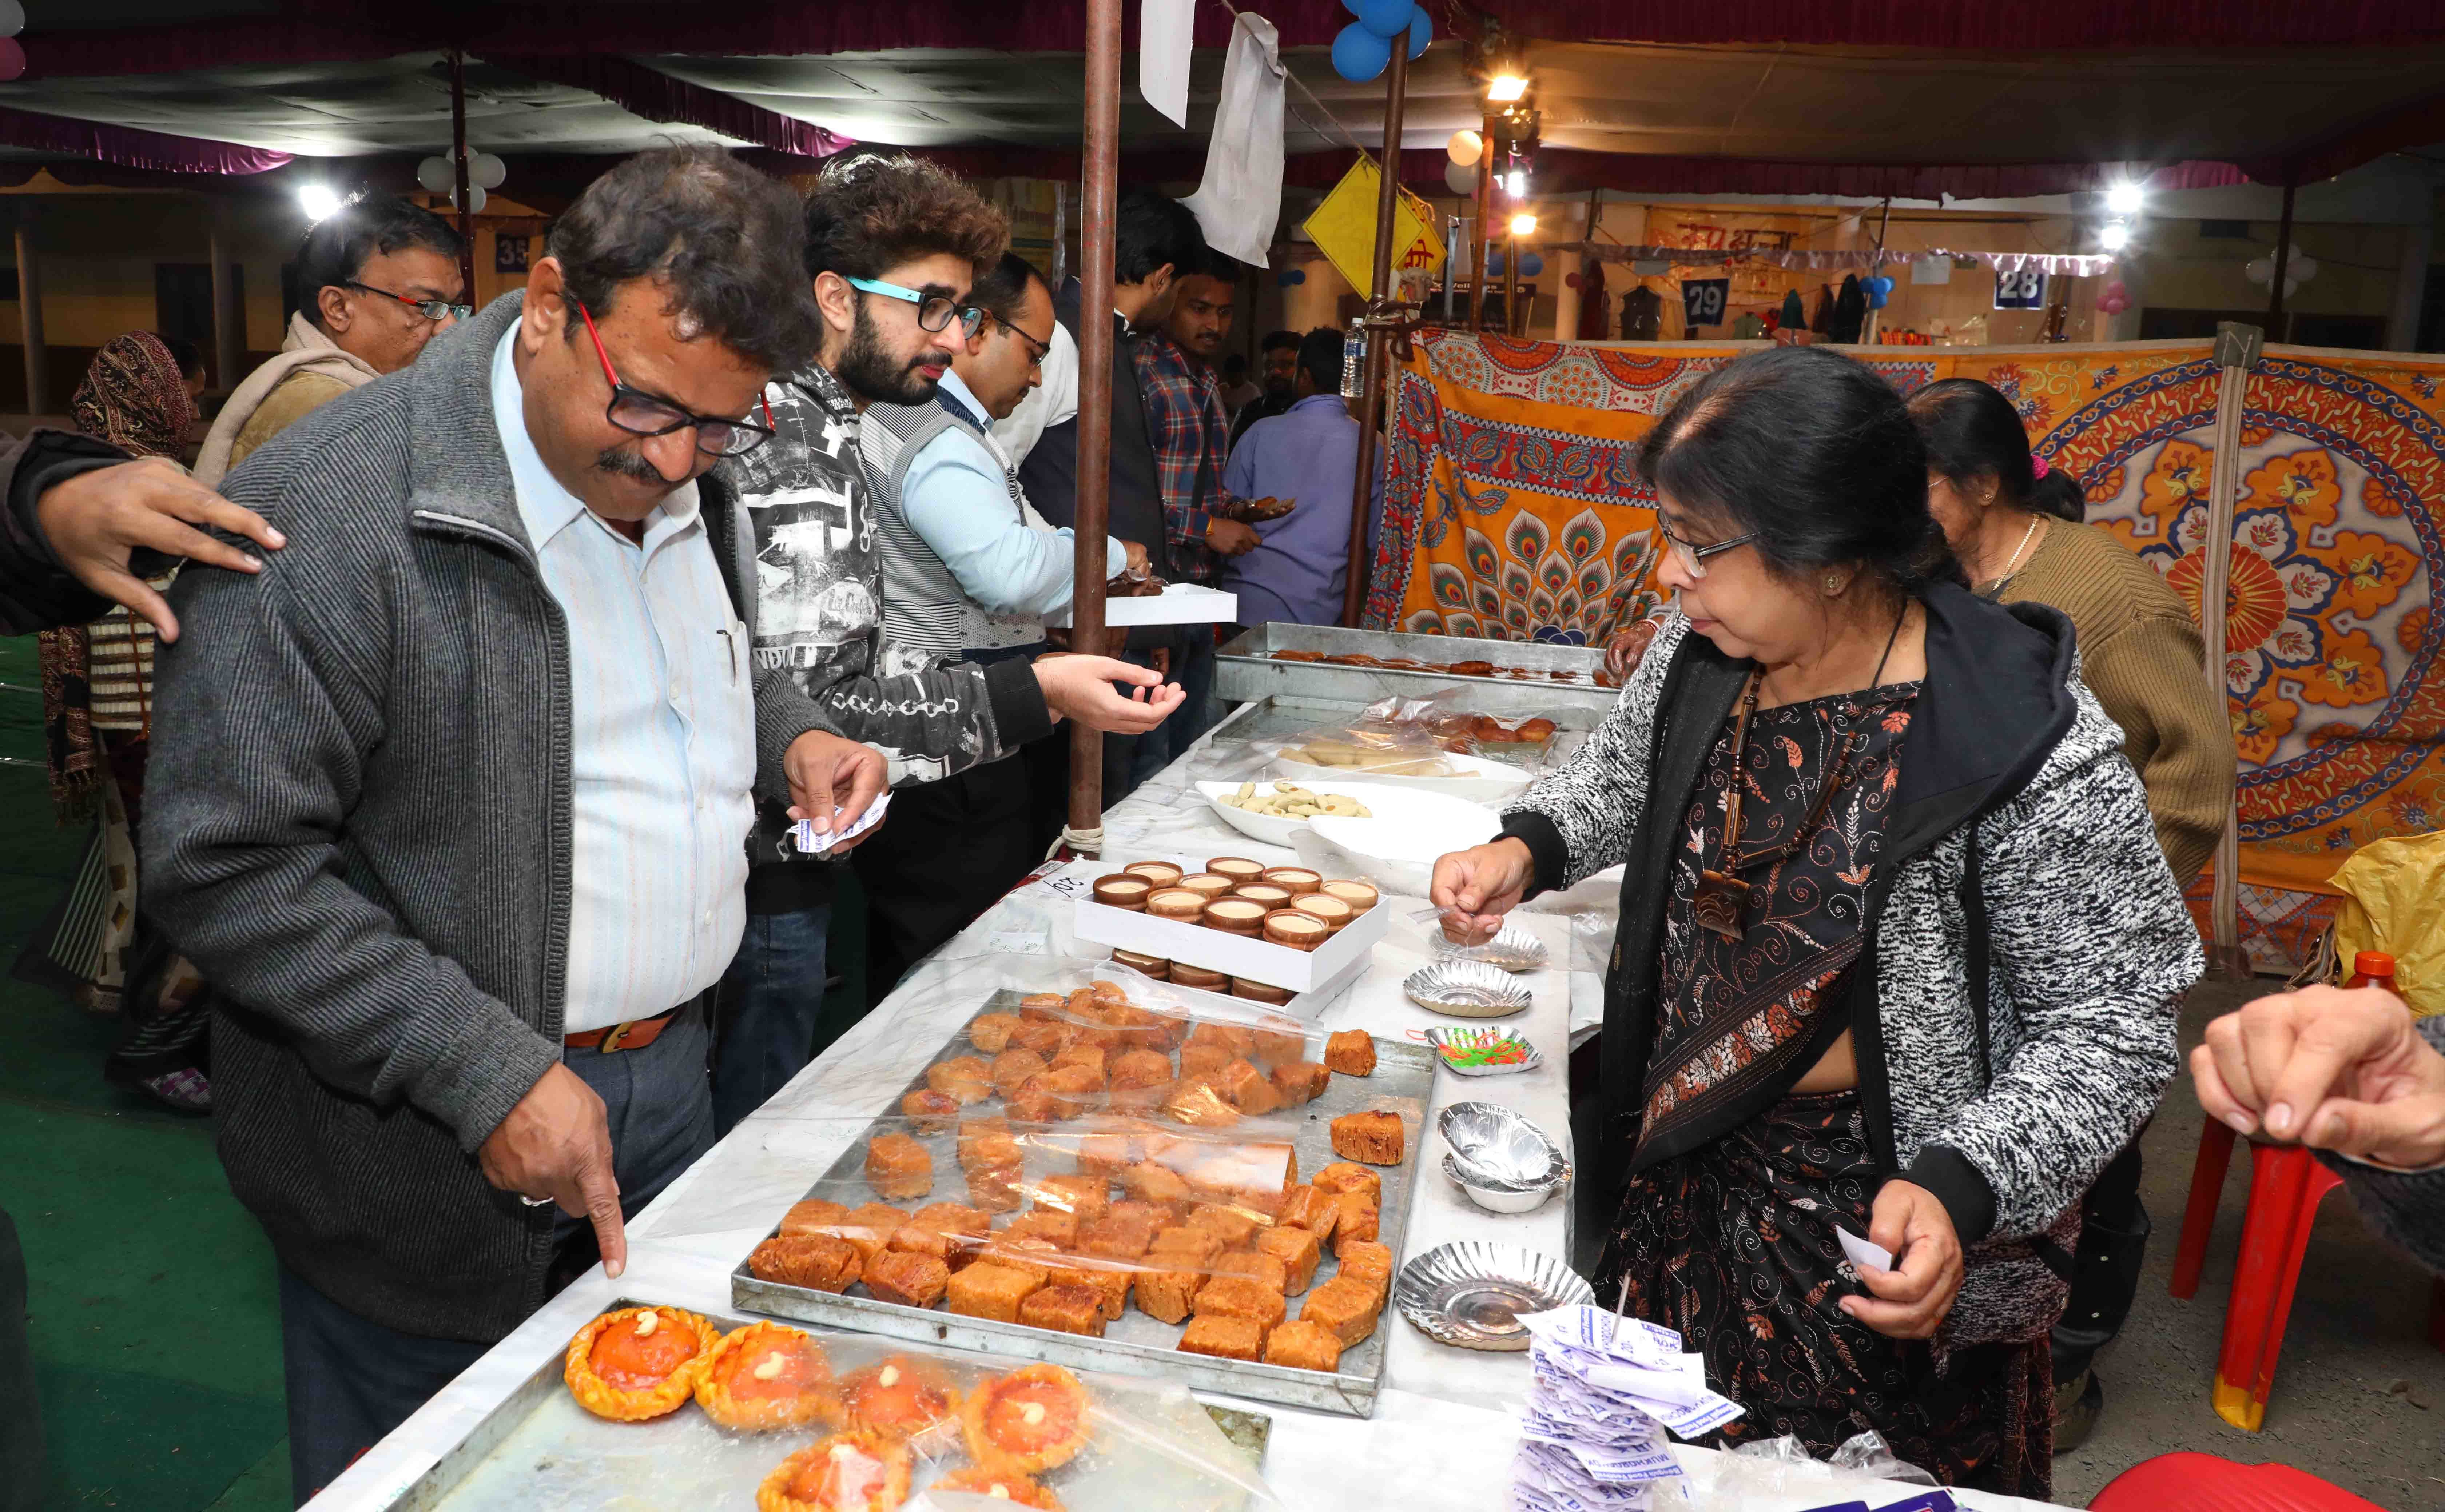 choosing from a variety of mishti